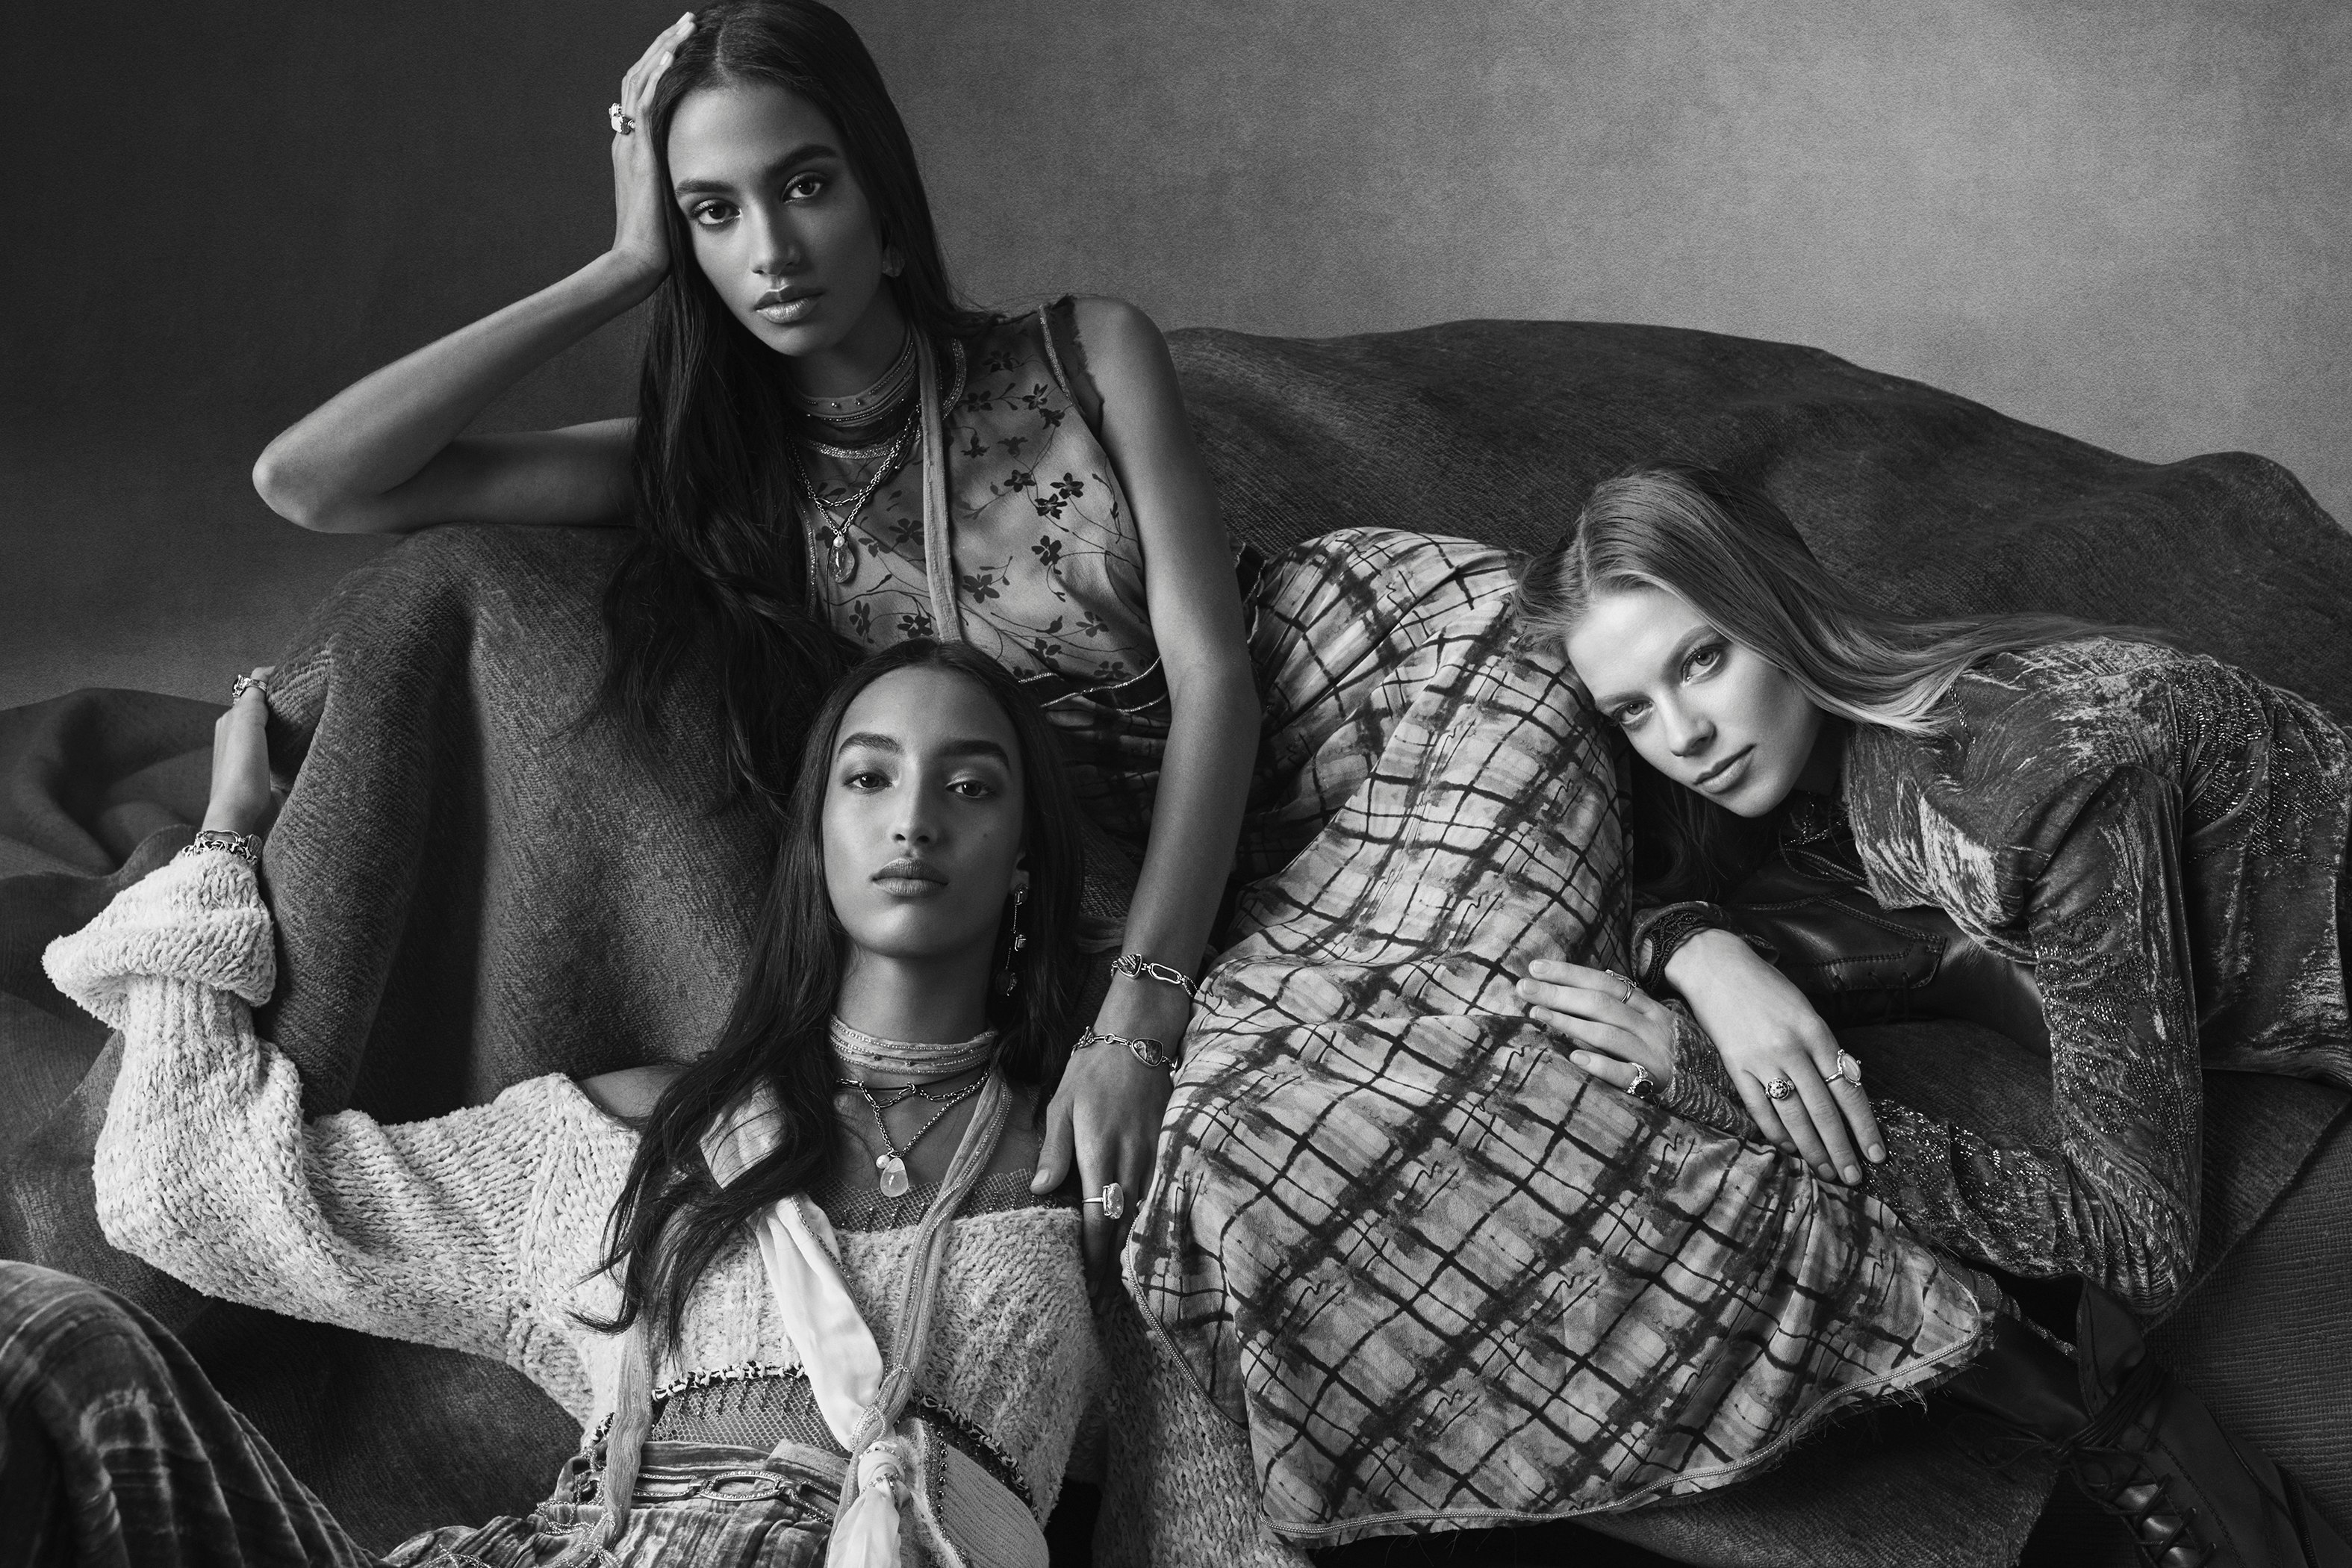 Zara's Summer Campaign Collection Puts 